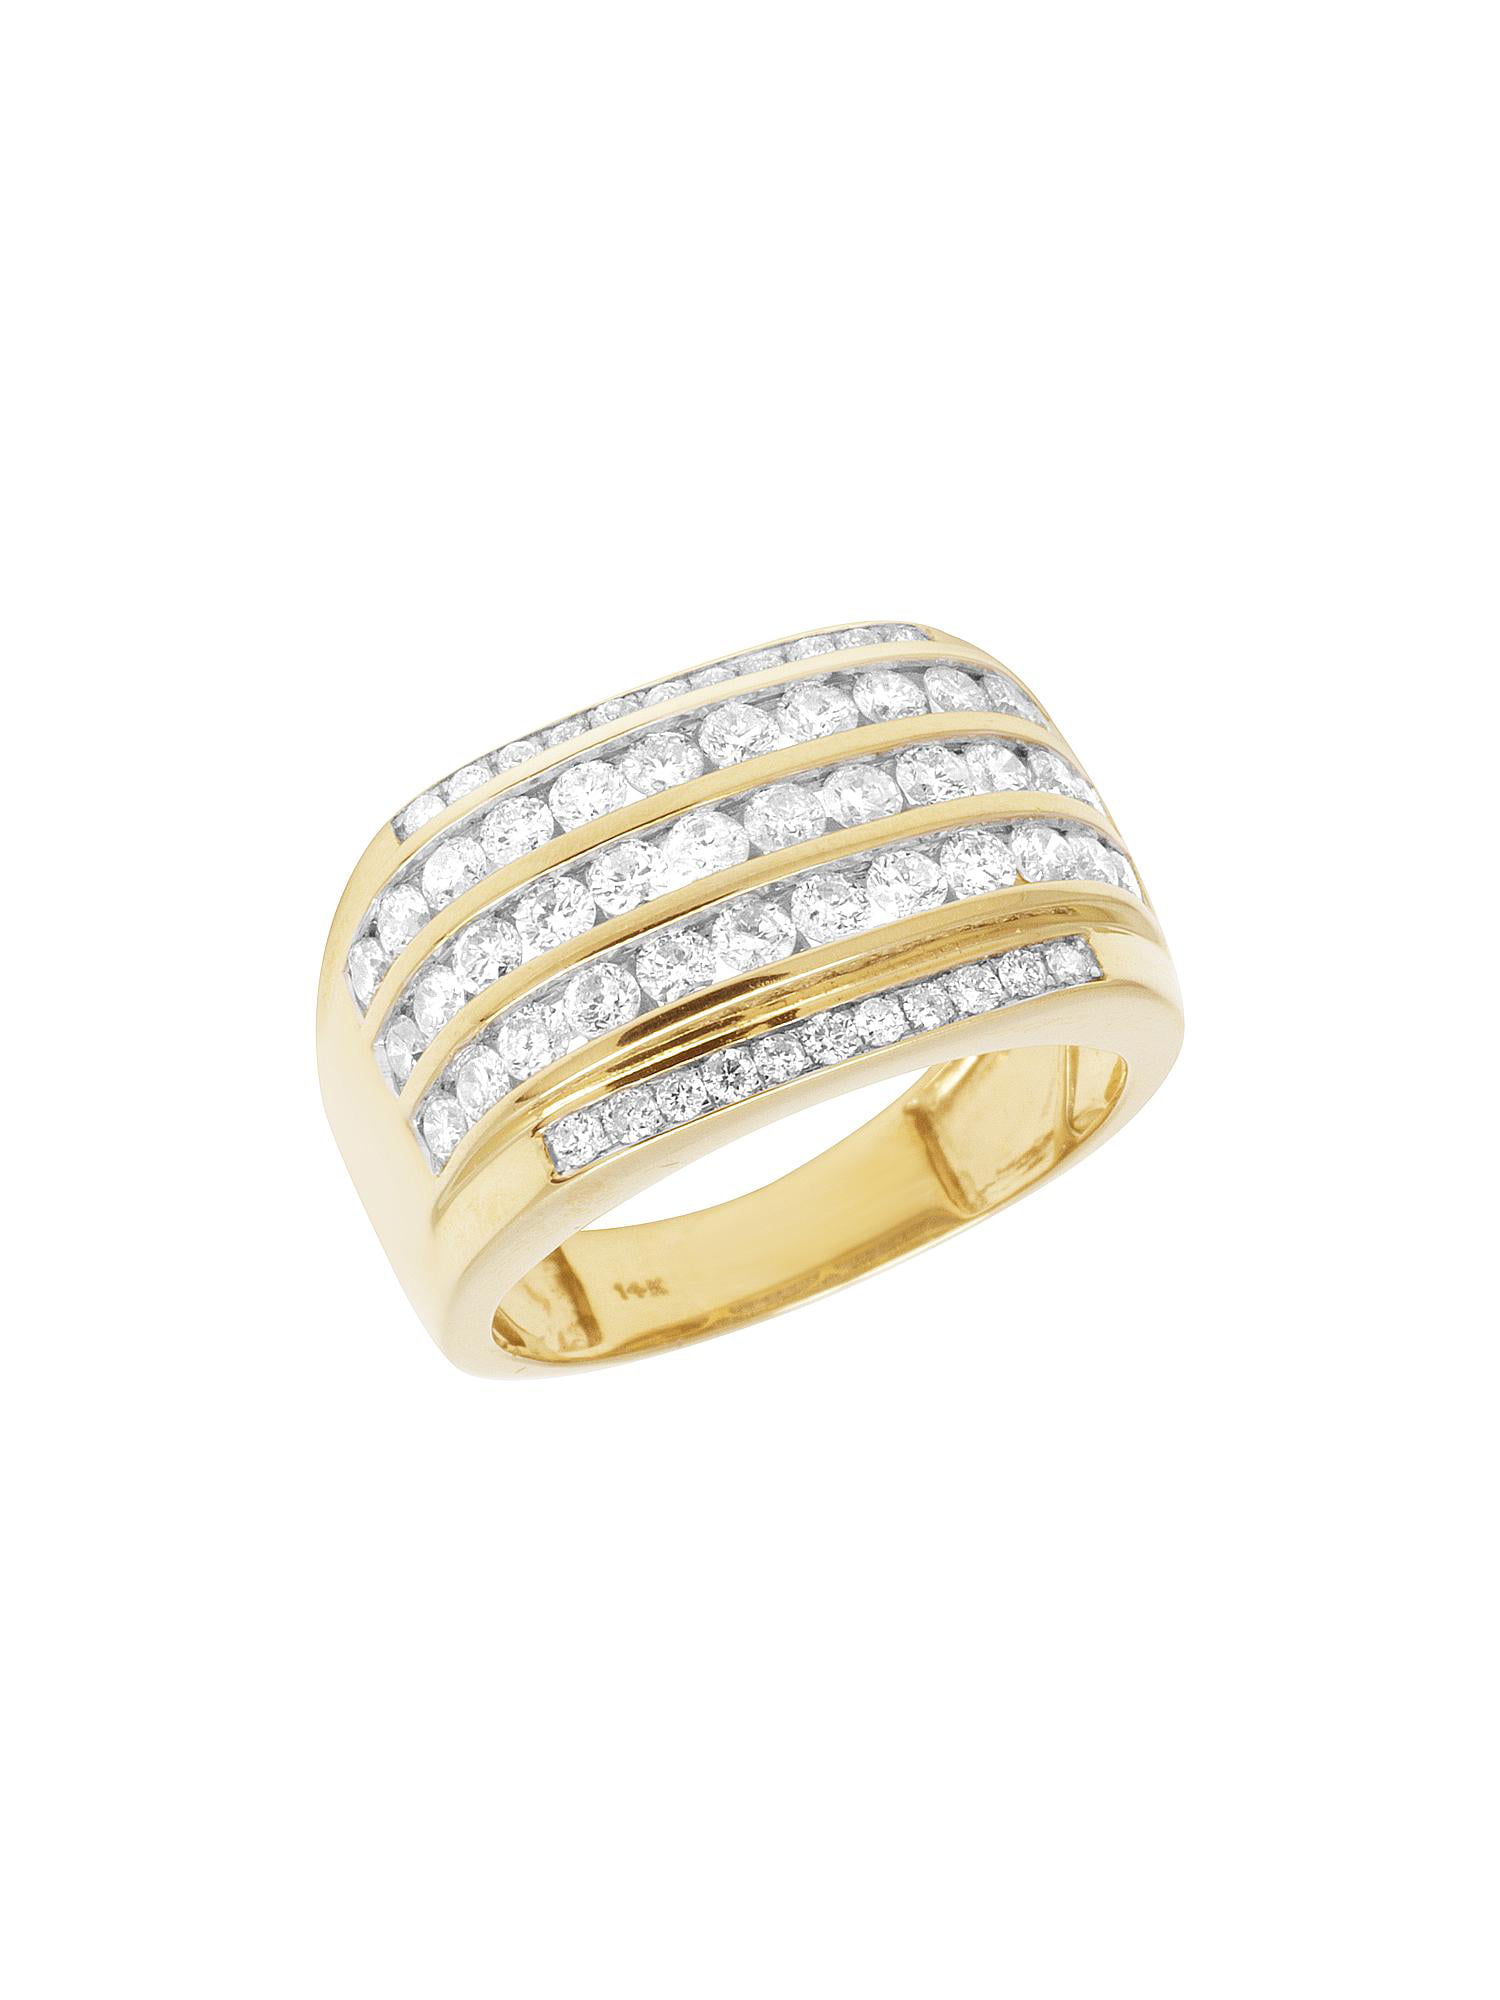 Jewelry Unlimited - Mens 14K Yellow Gold Real Diamond Channel Wedding ...